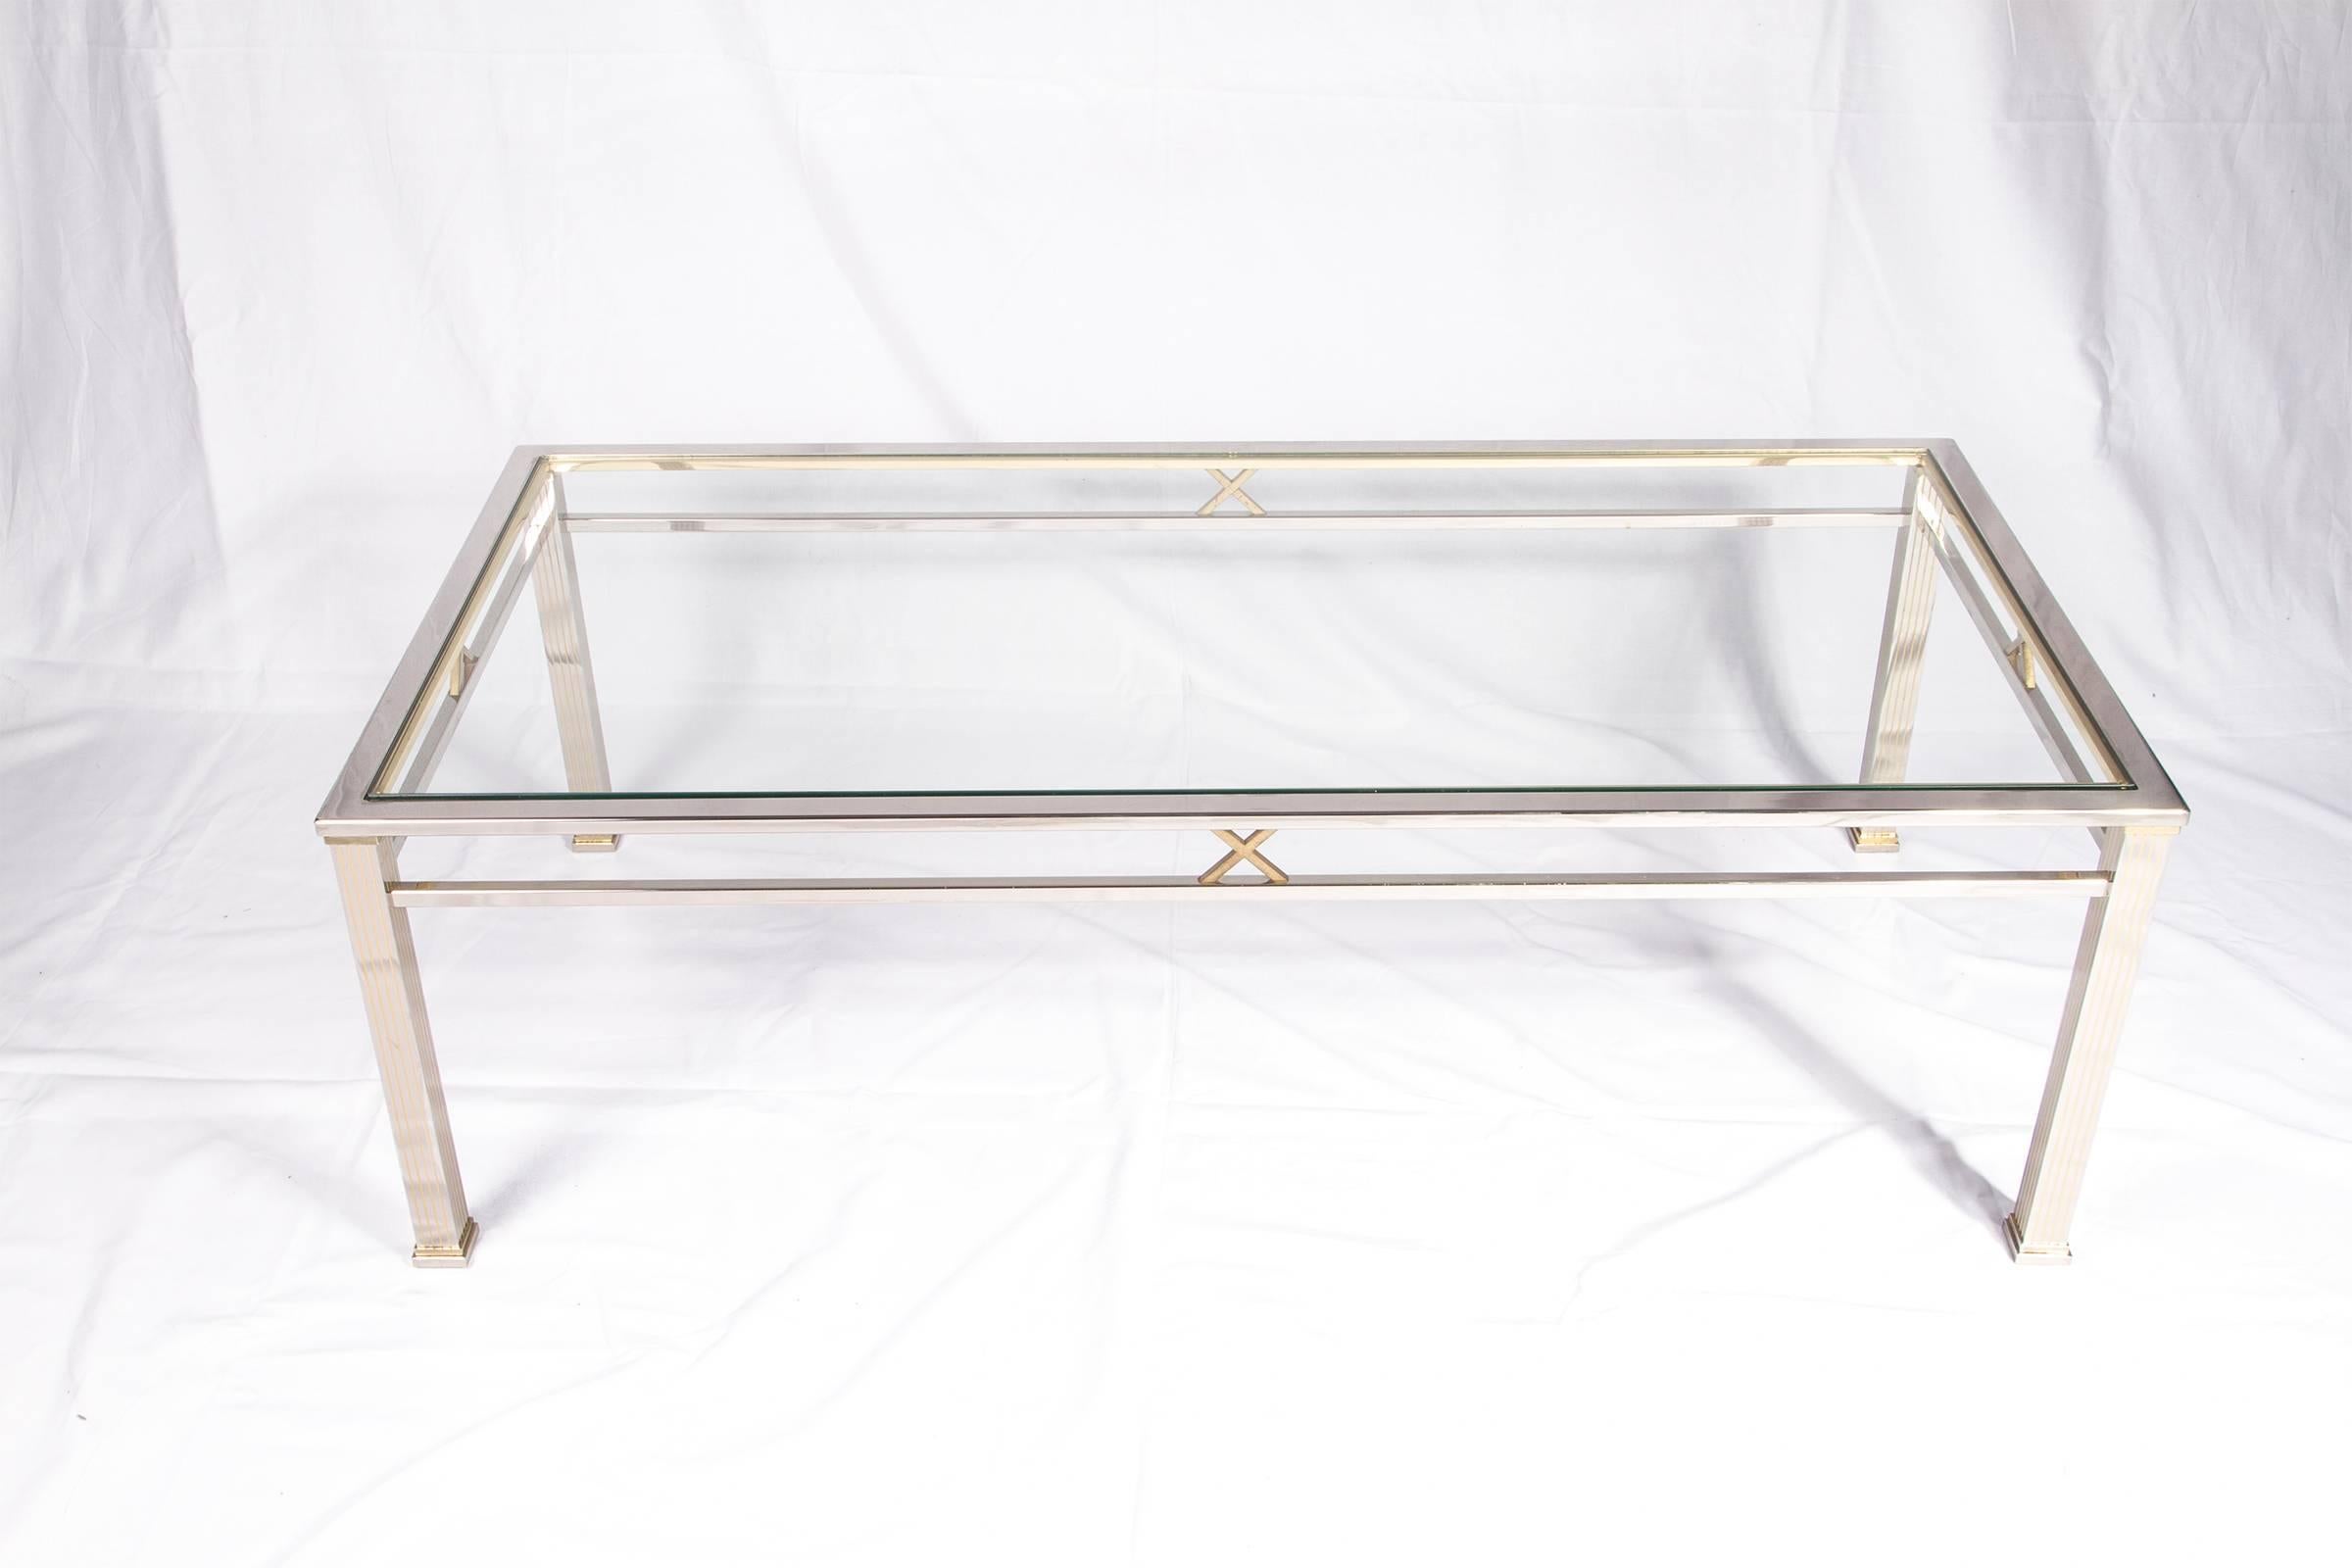 Chrome and Glass Coffee Table by Belgo Chrome In Excellent Condition For Sale In Brussels, Brussels